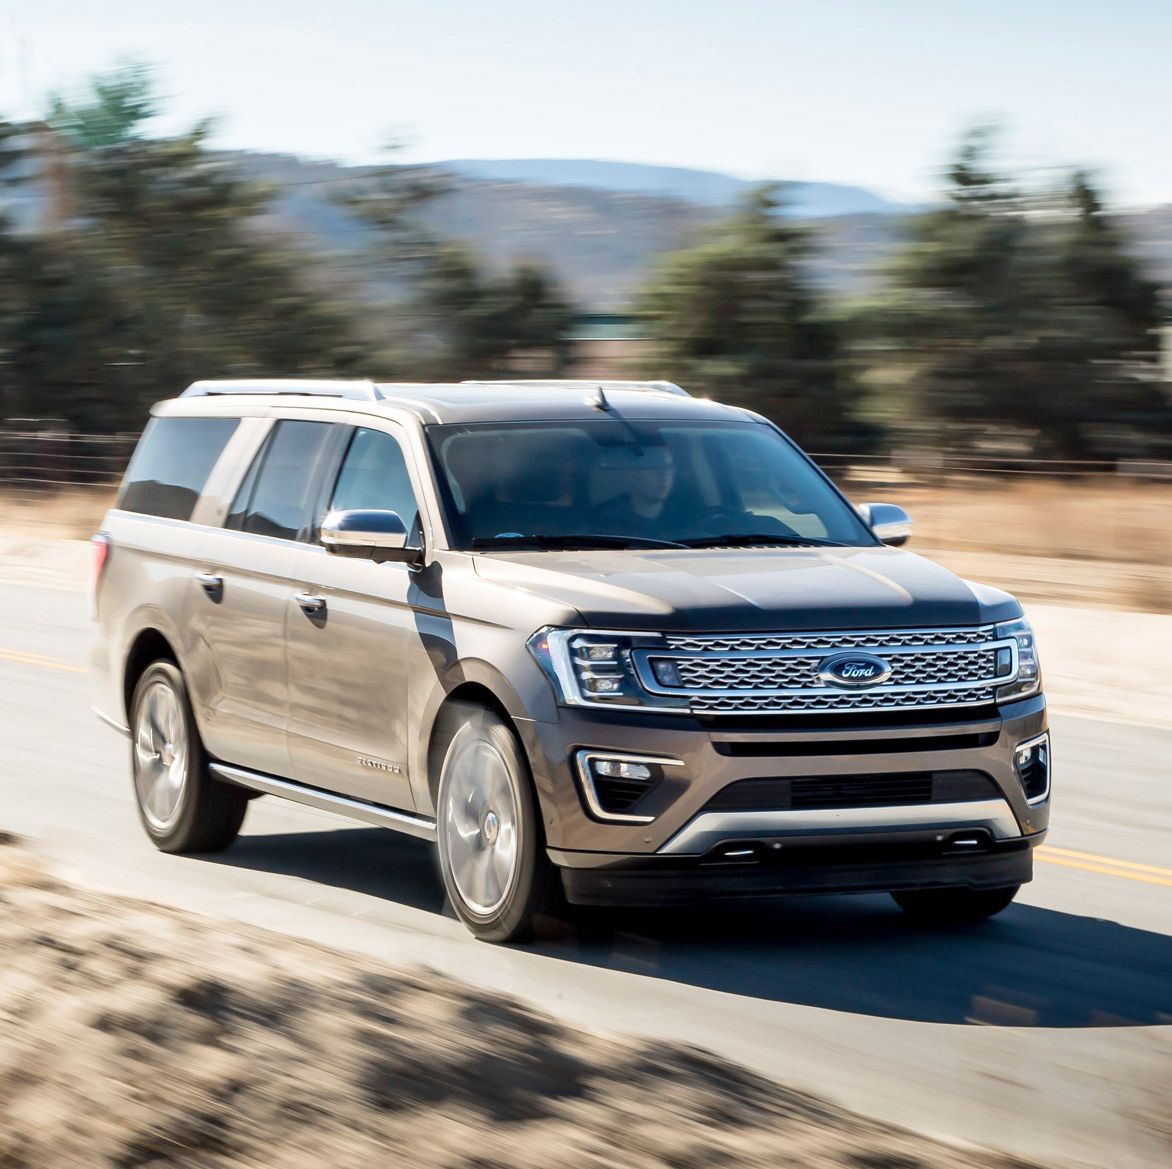 Tested: 2018 Ford Expedition Max 4x4 Test